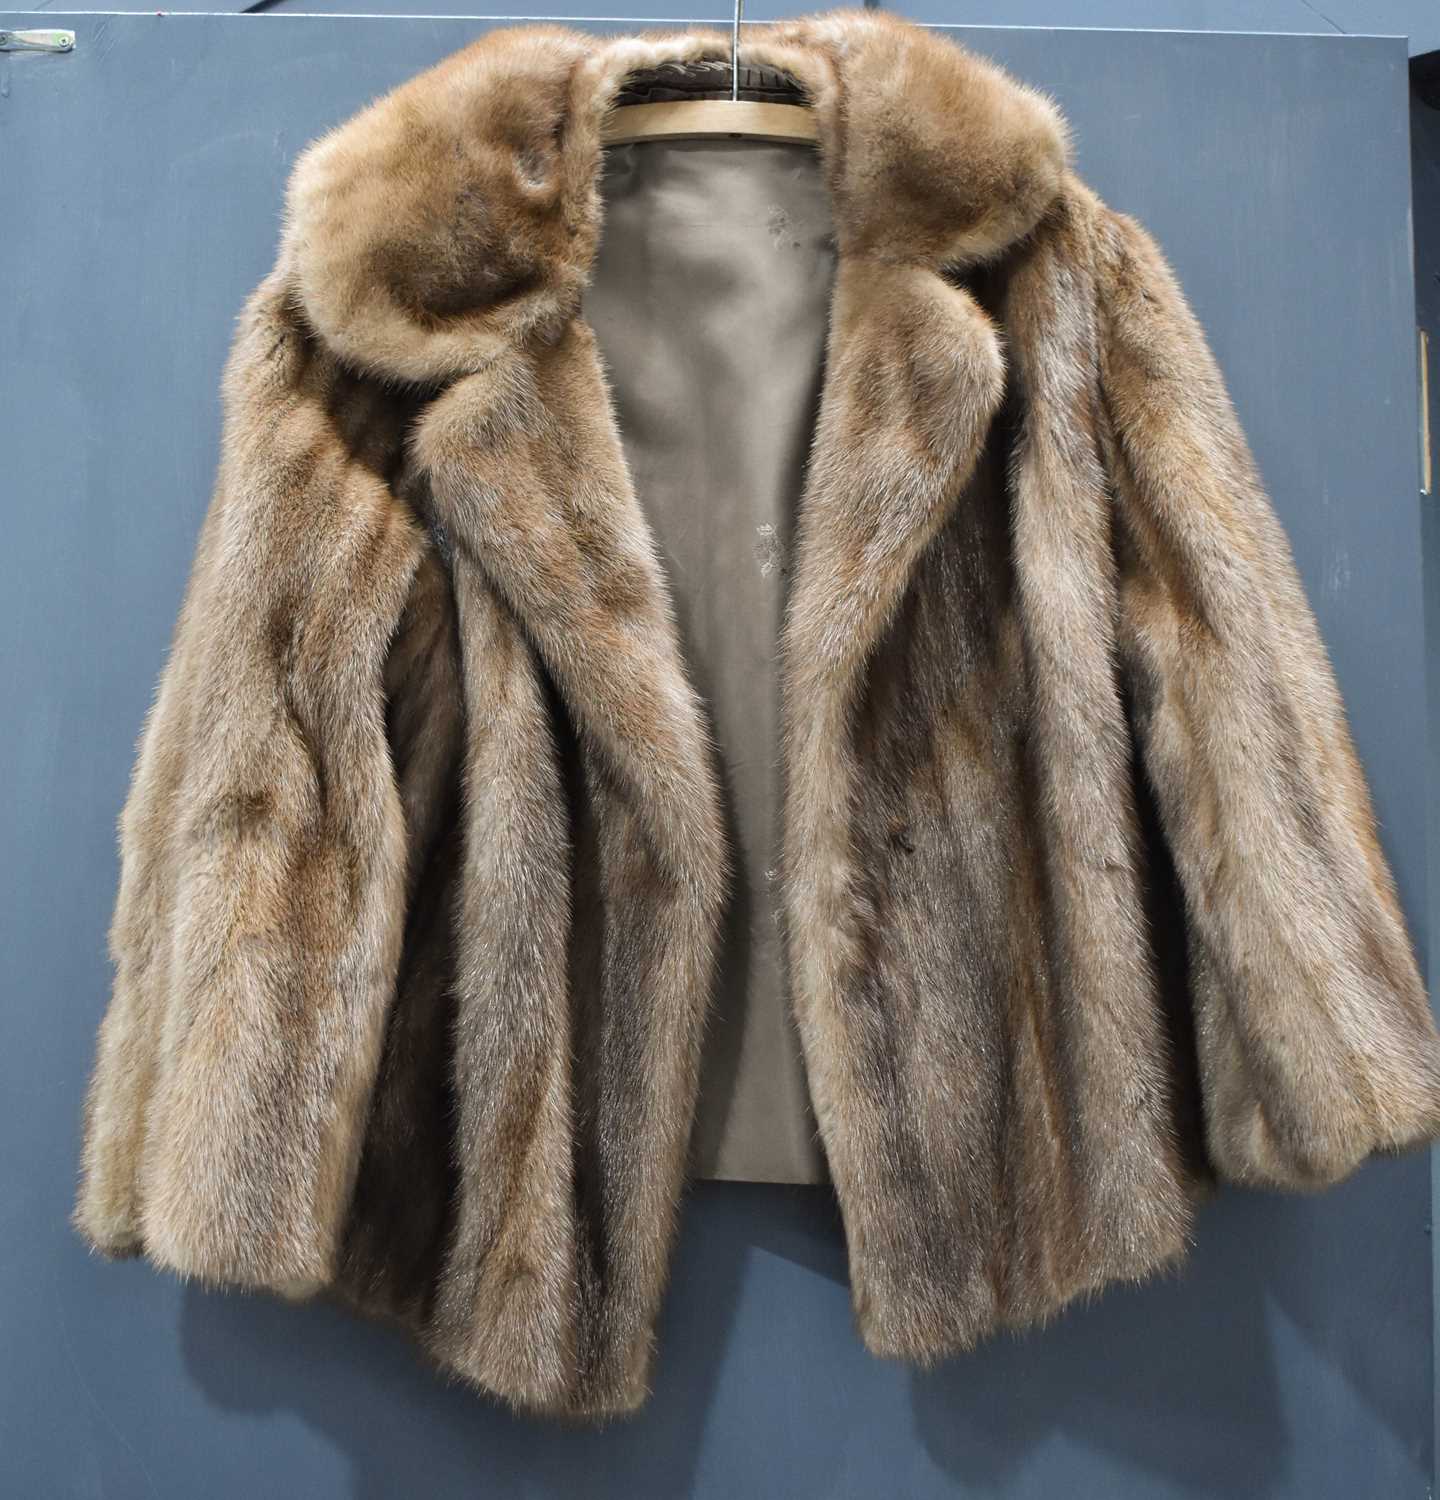 A vintage fur jacket, likely musquash, with brown satin lining.